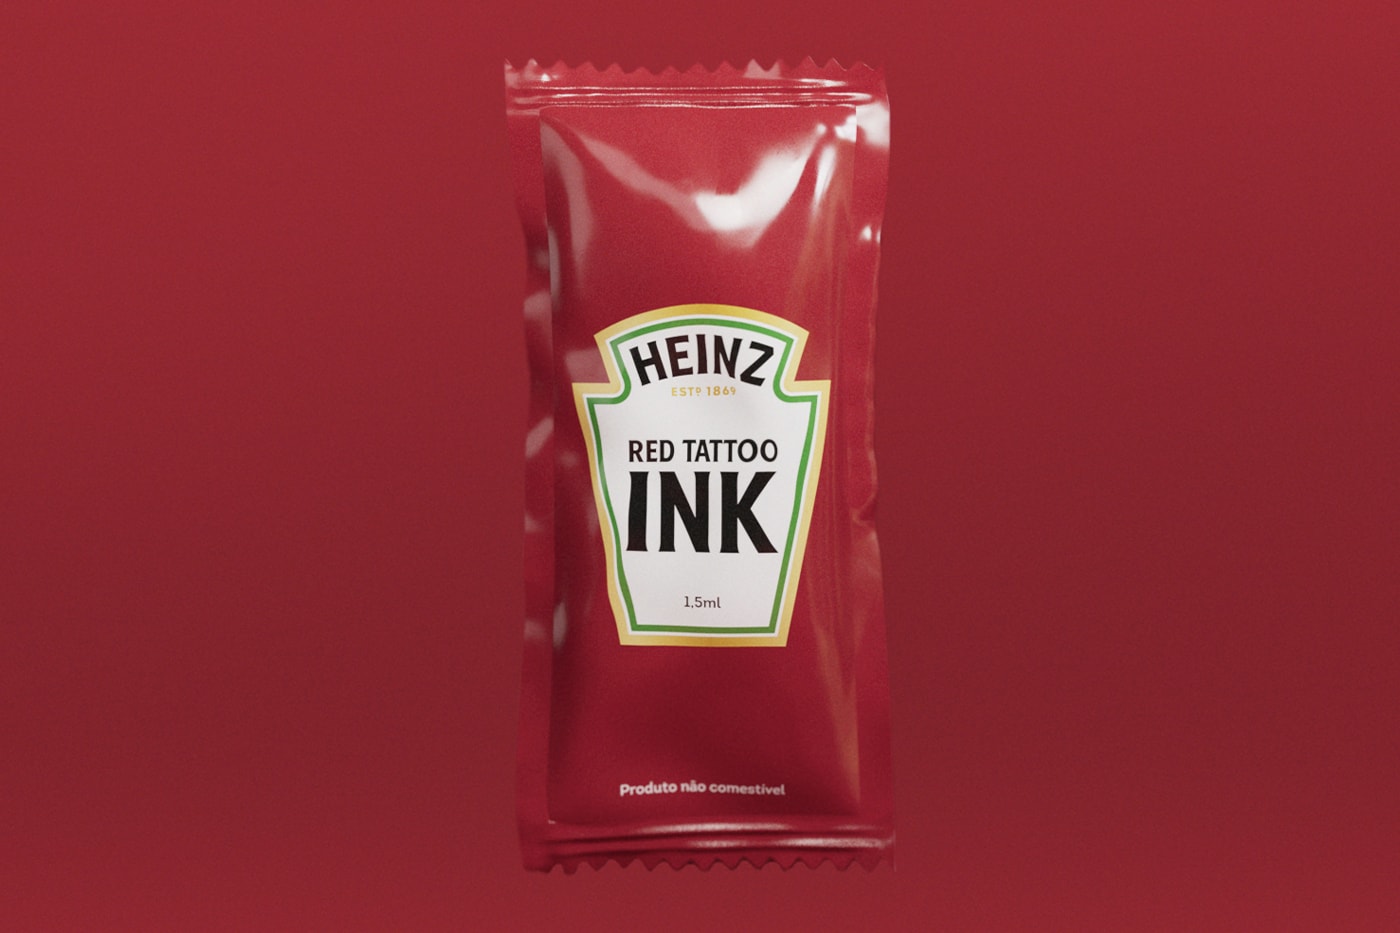 Heinz Red Tattoo Ink pigment ketchup soko electric ink non harmful ingredients news info 